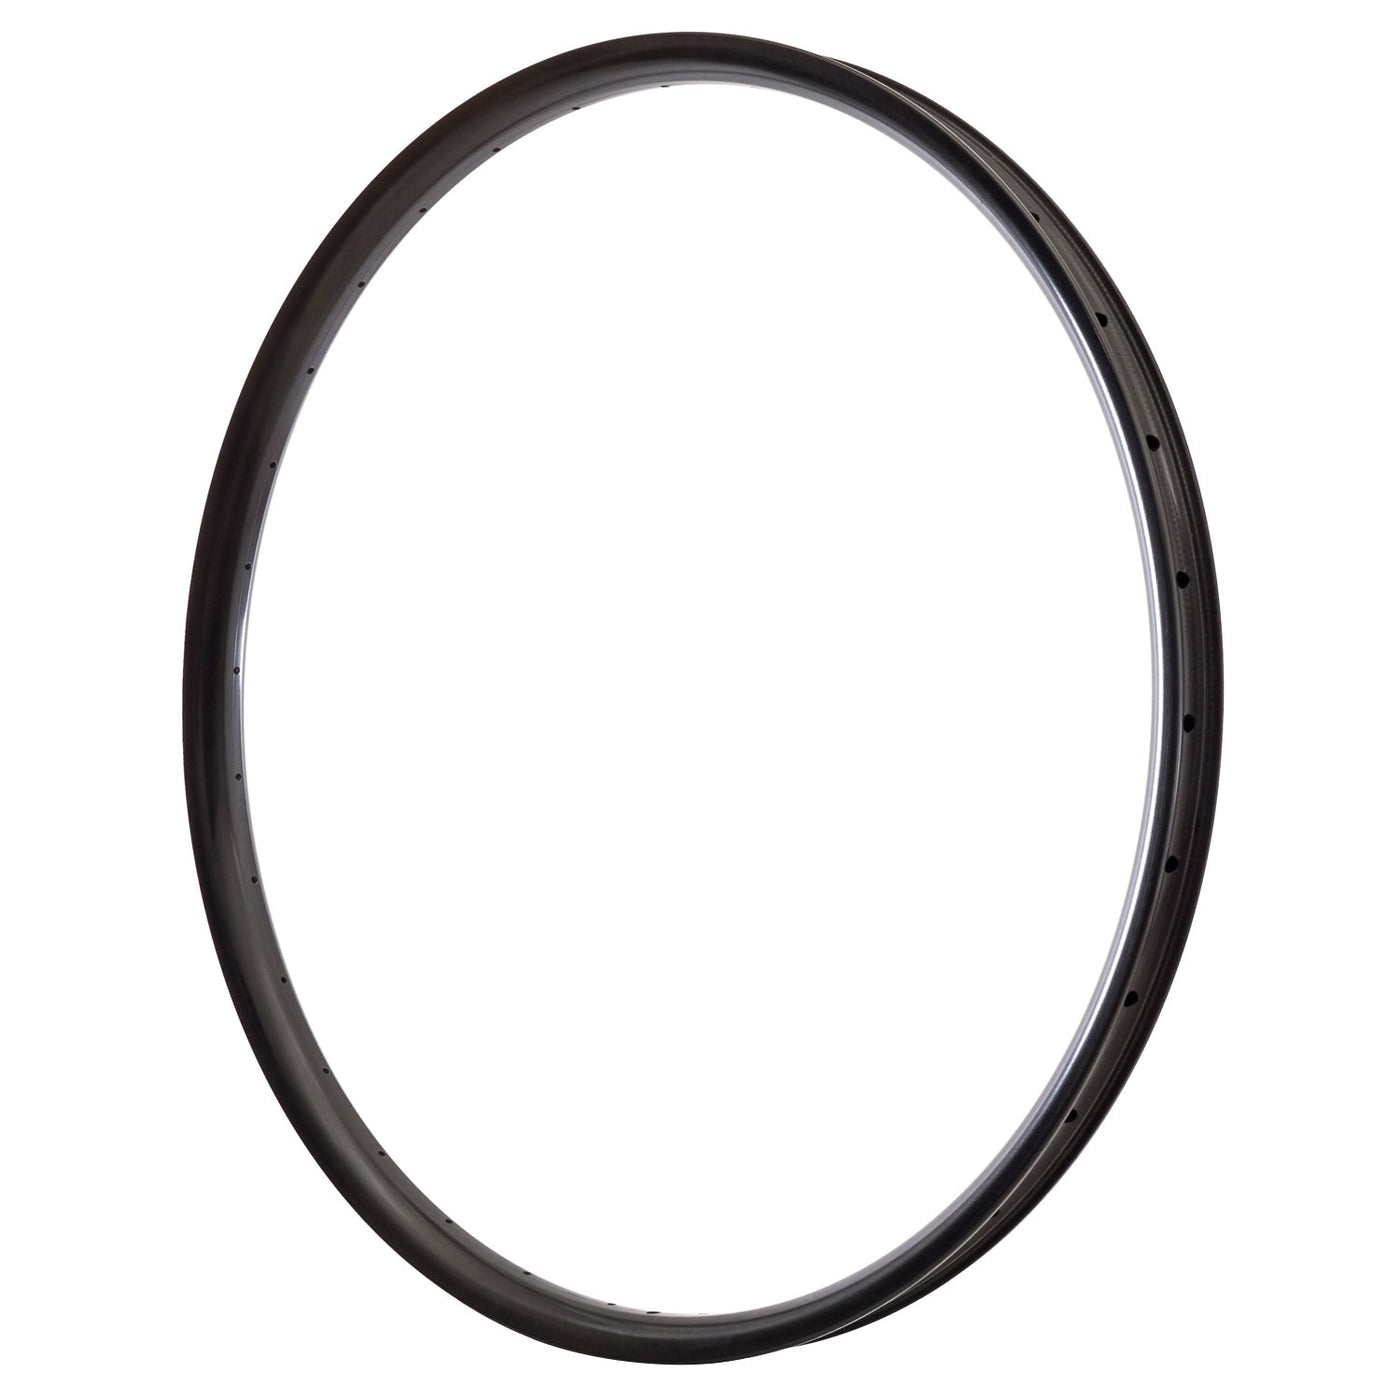 Rim Only WeAreOne Convert - Carbon